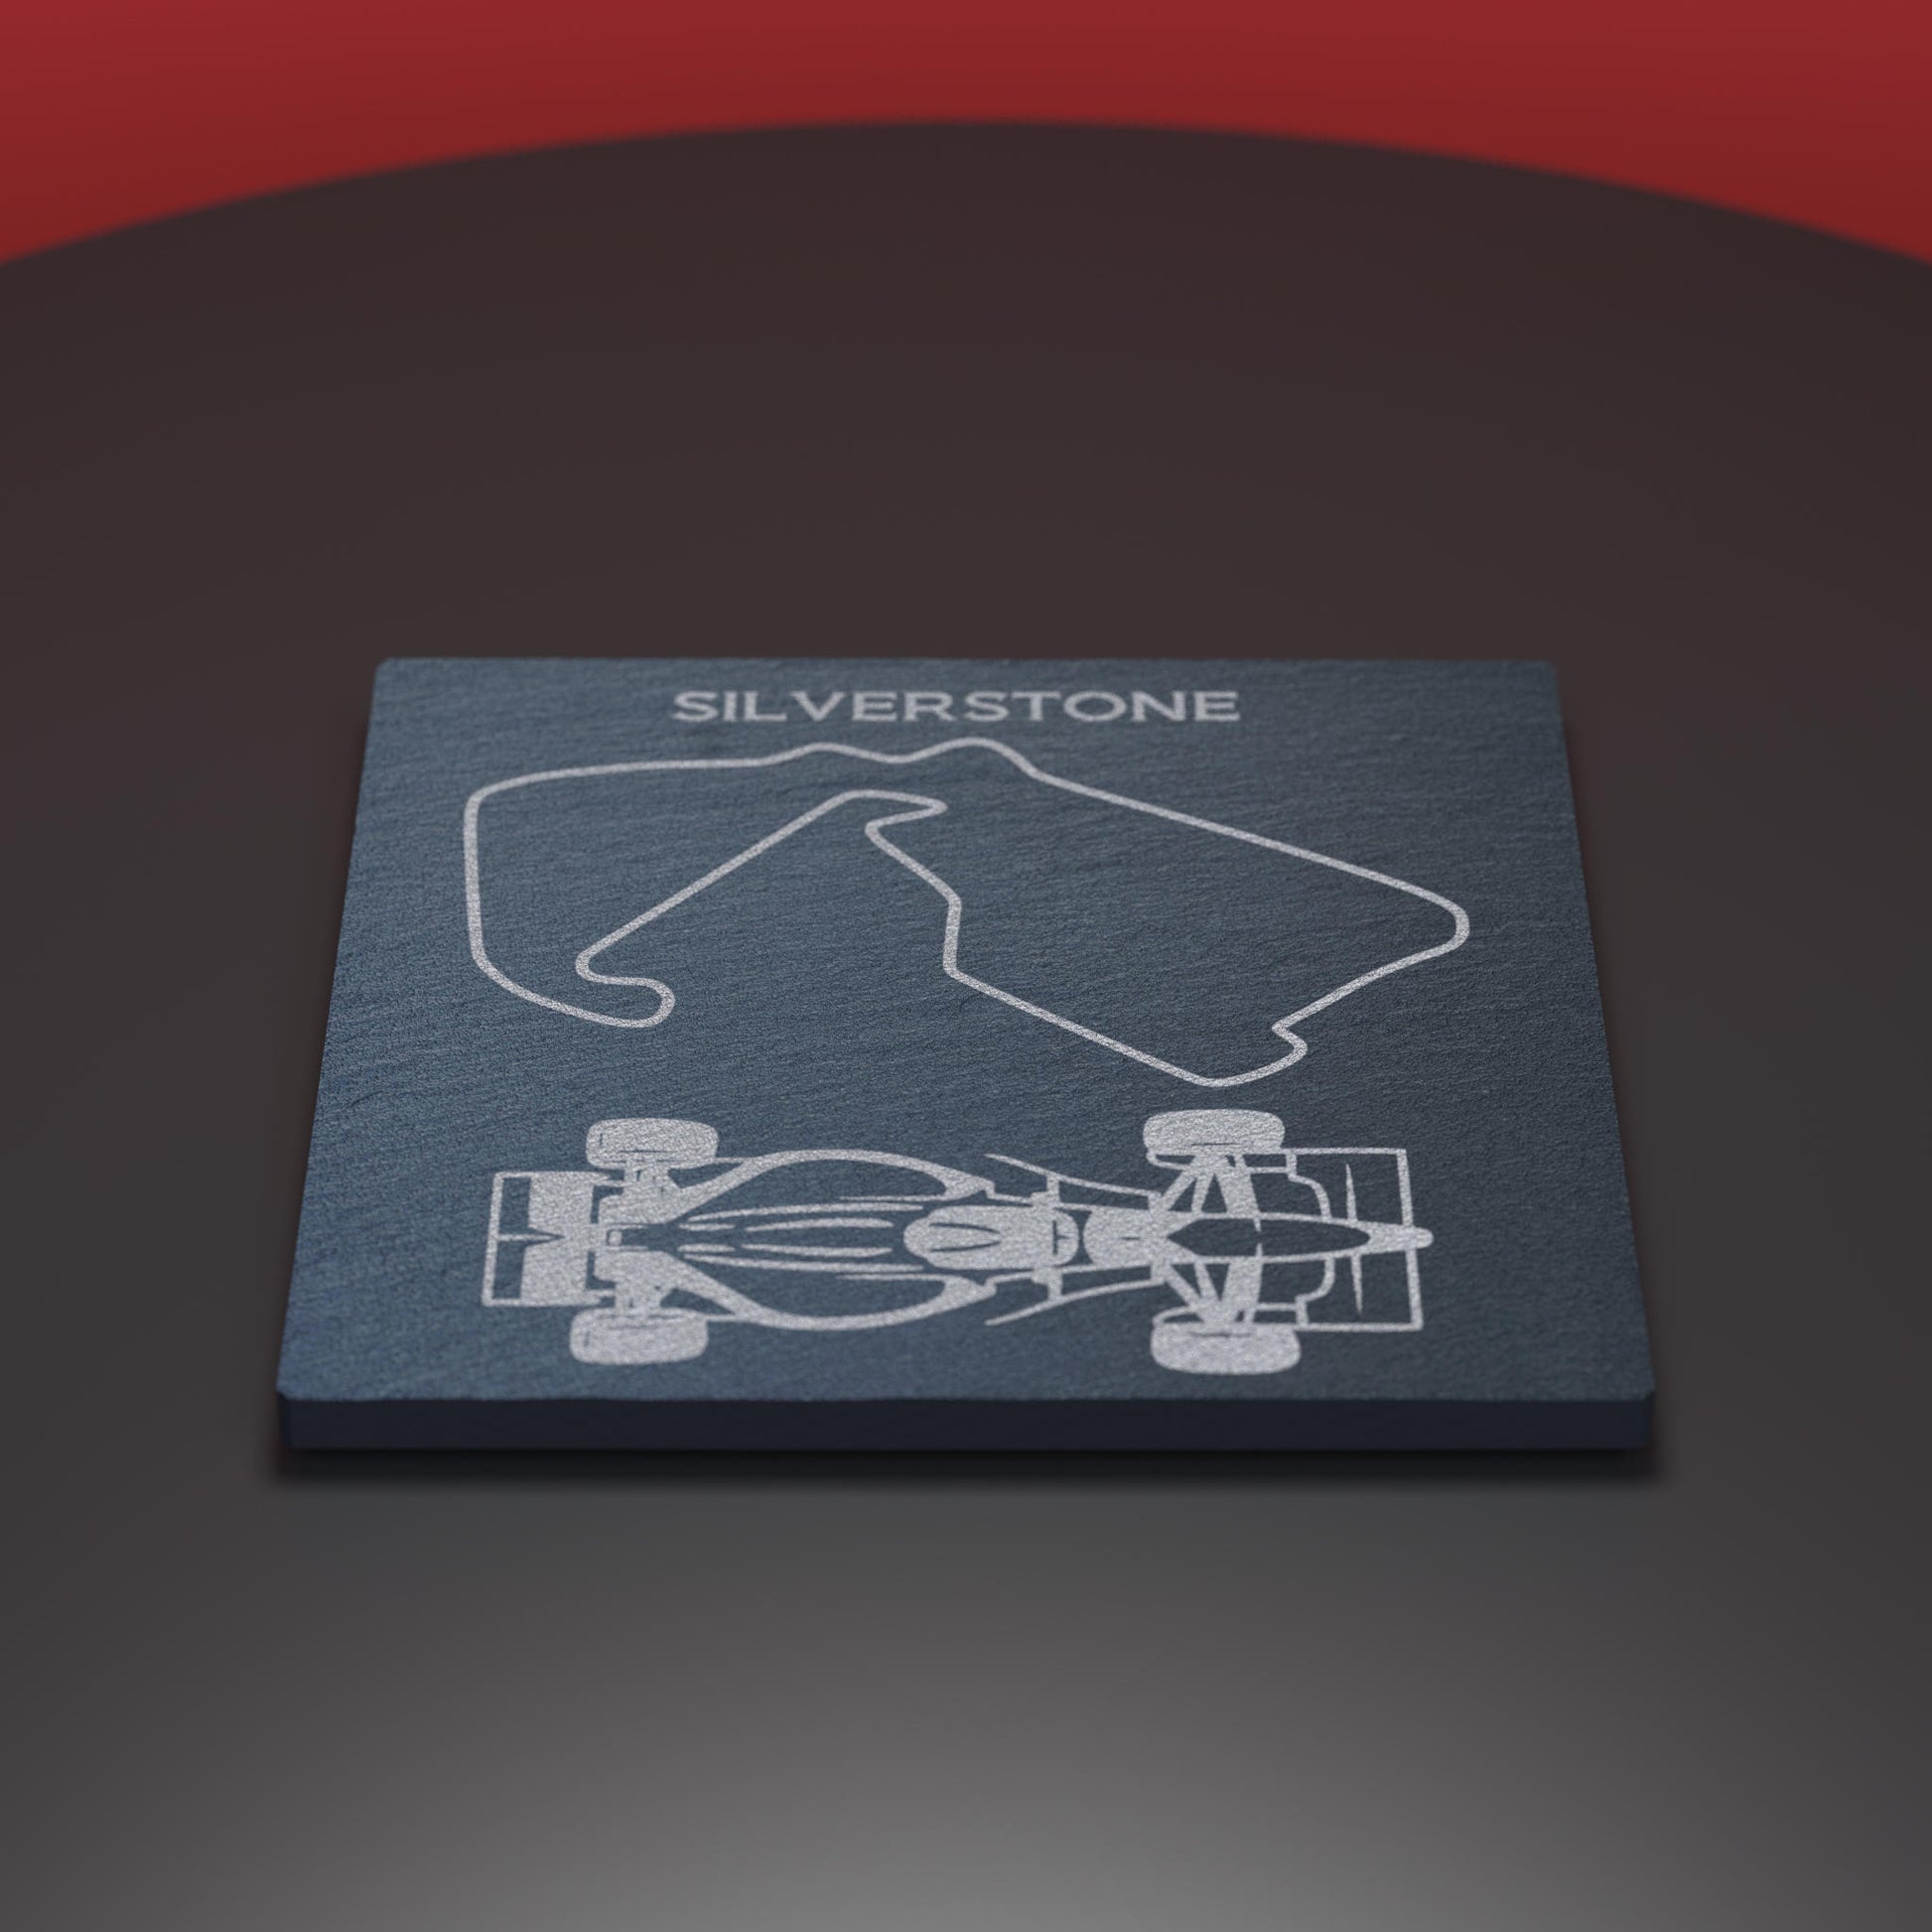 Slate coaster engraved with F1 car and silverstone course